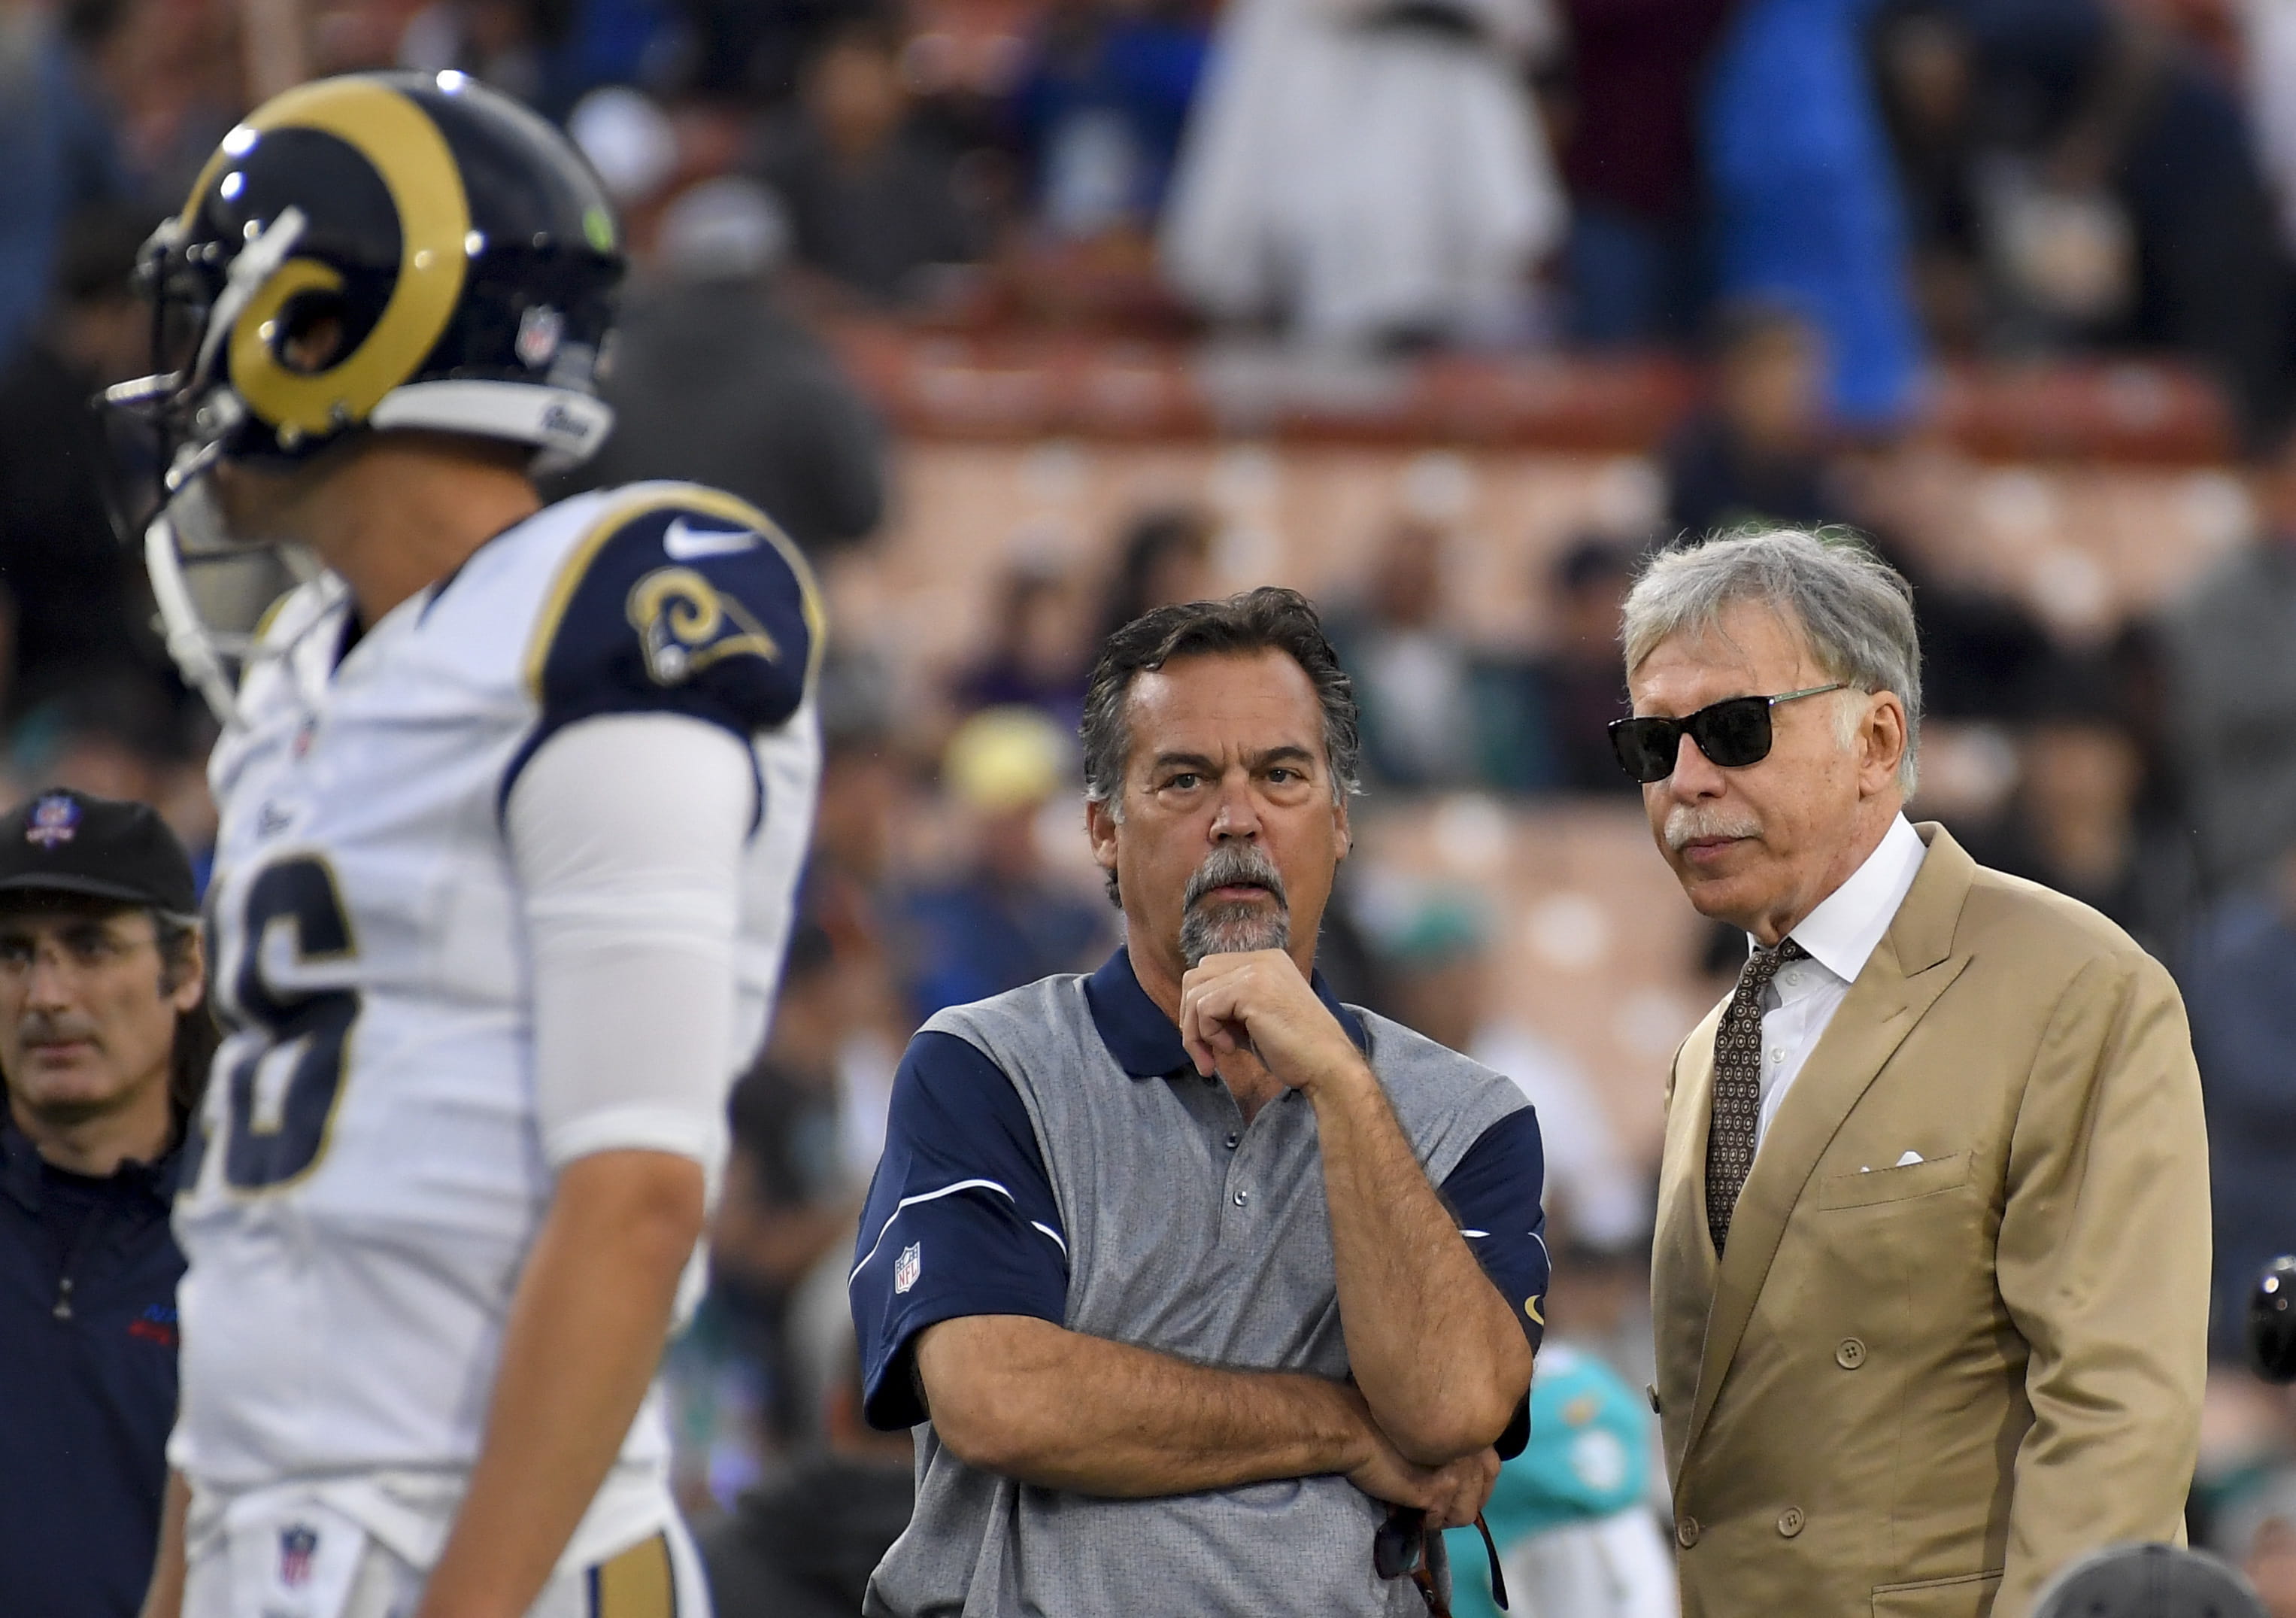 Rams coach Jeff Fisher, center, and team owner Stan Kroenke watch quarterback Jared Goff warm up before a game in 2016.